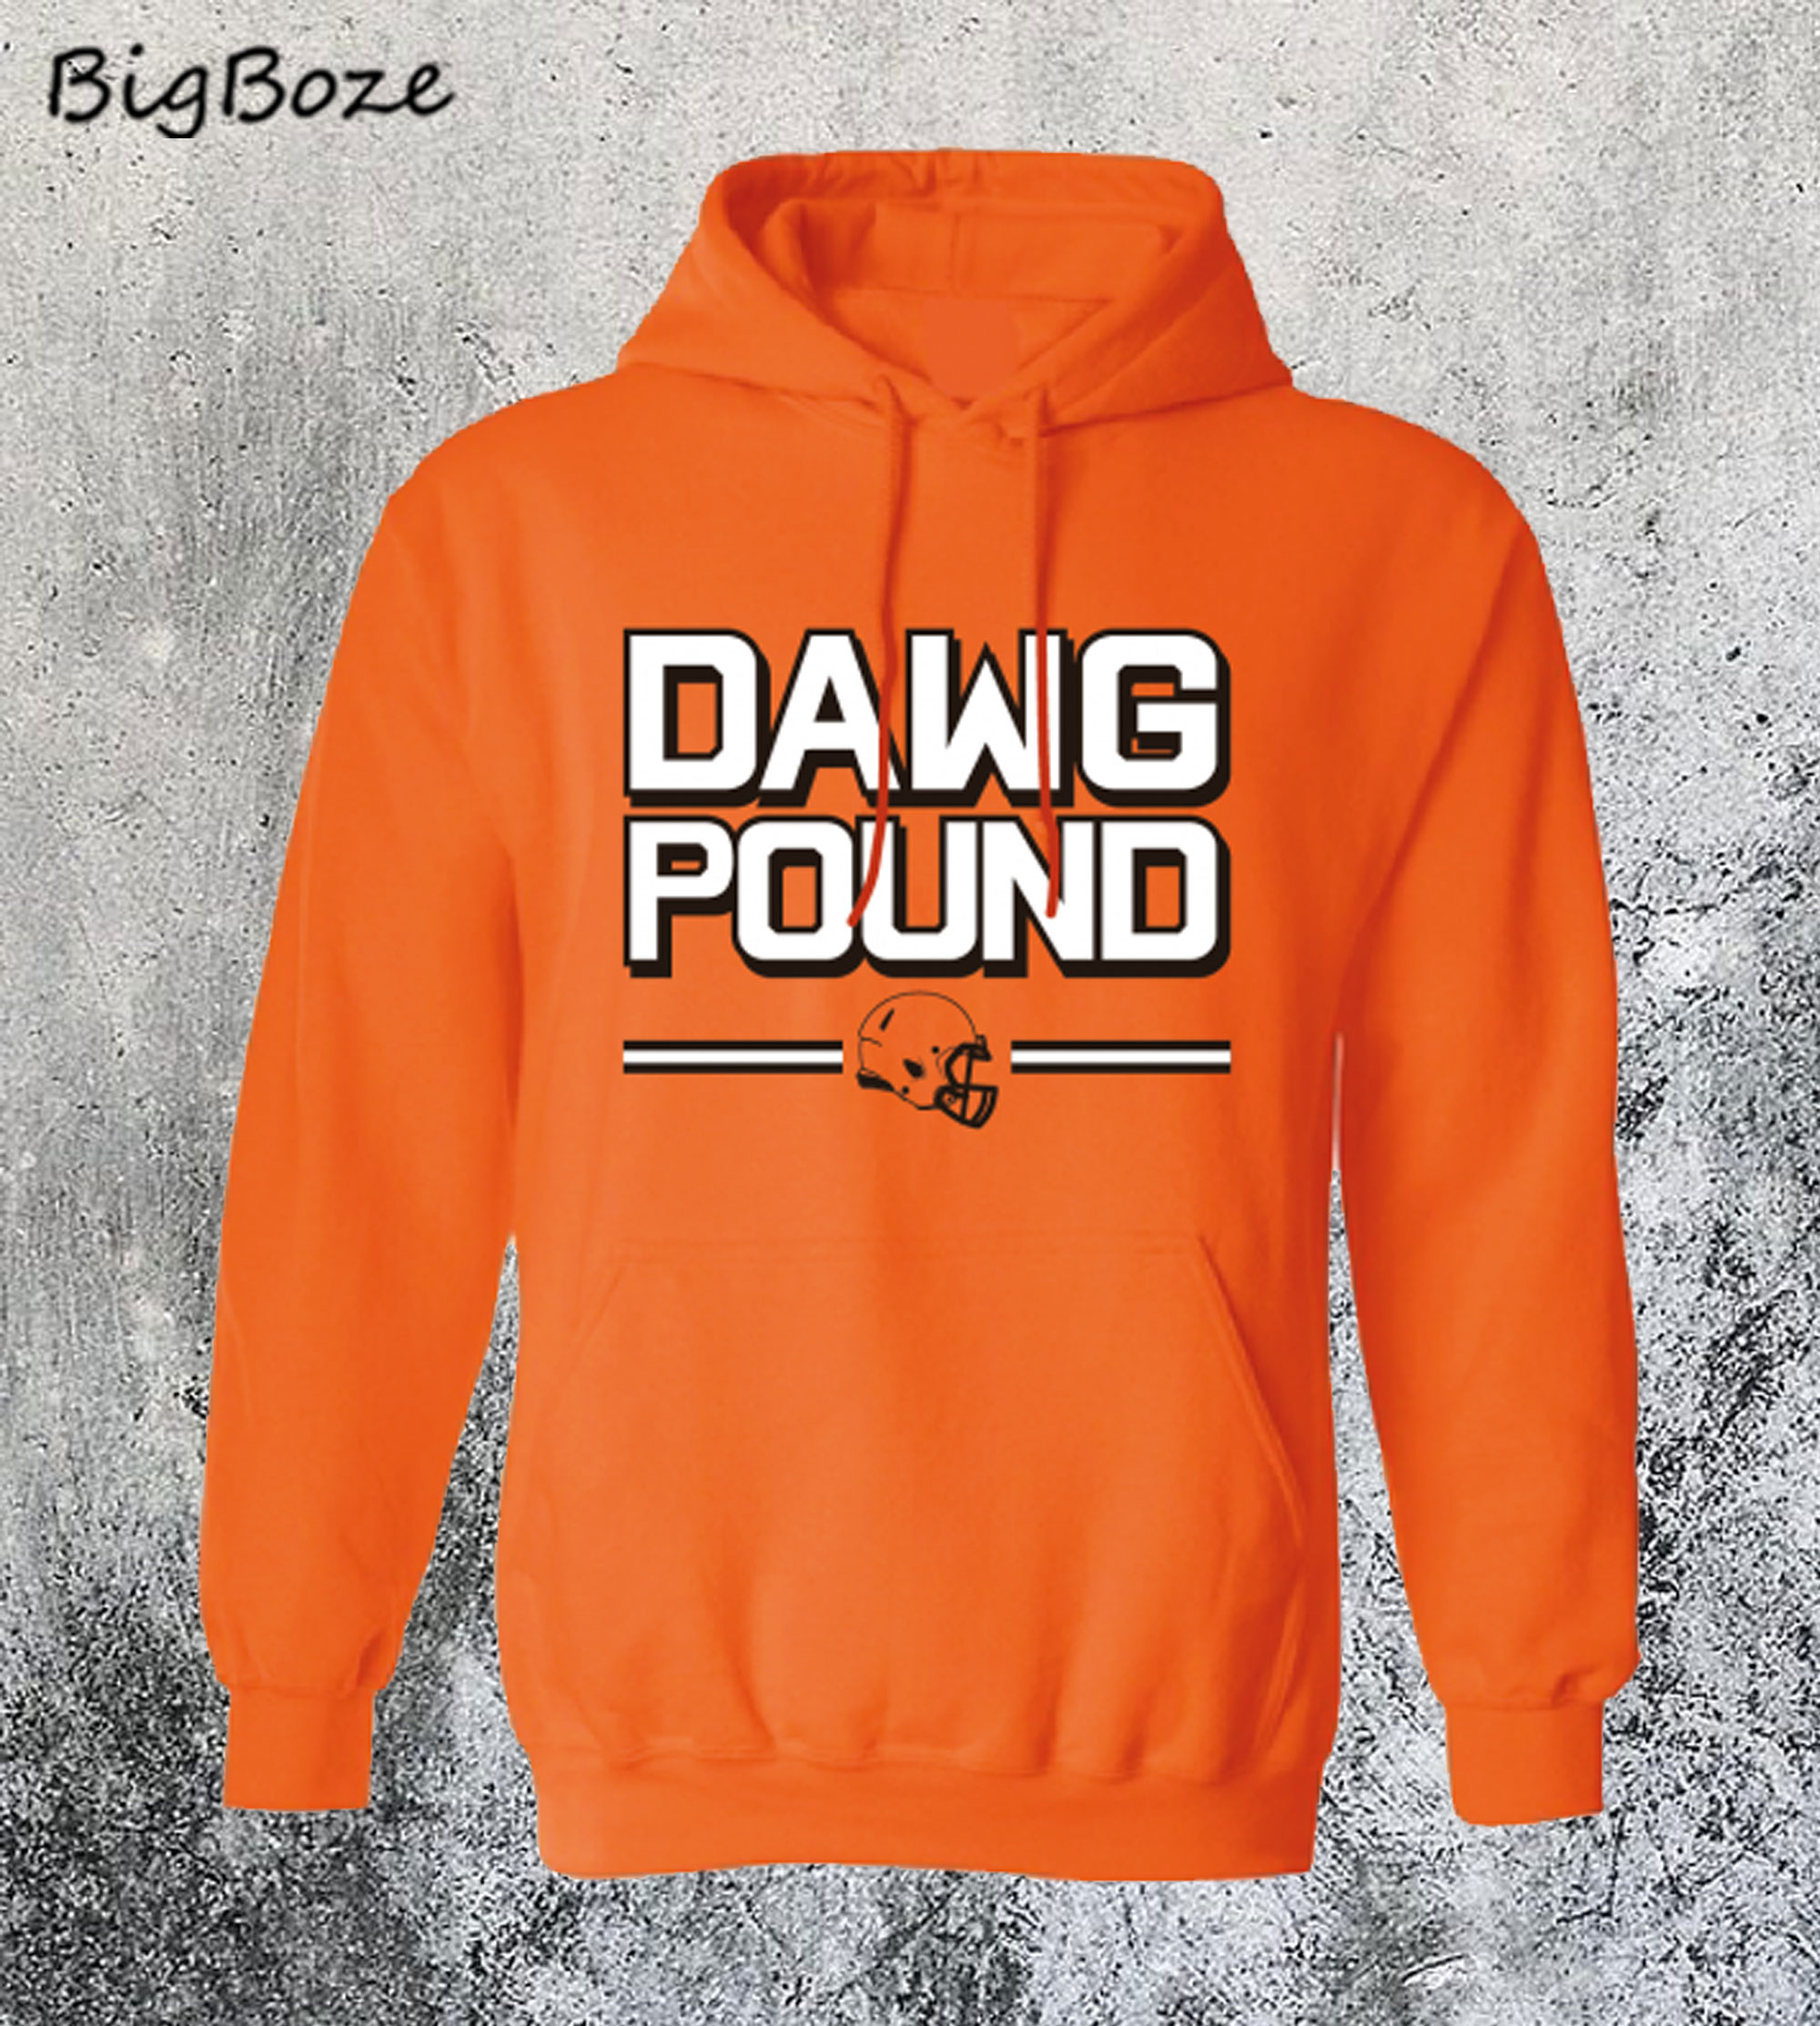 cleveland browns dawg pound hoodie